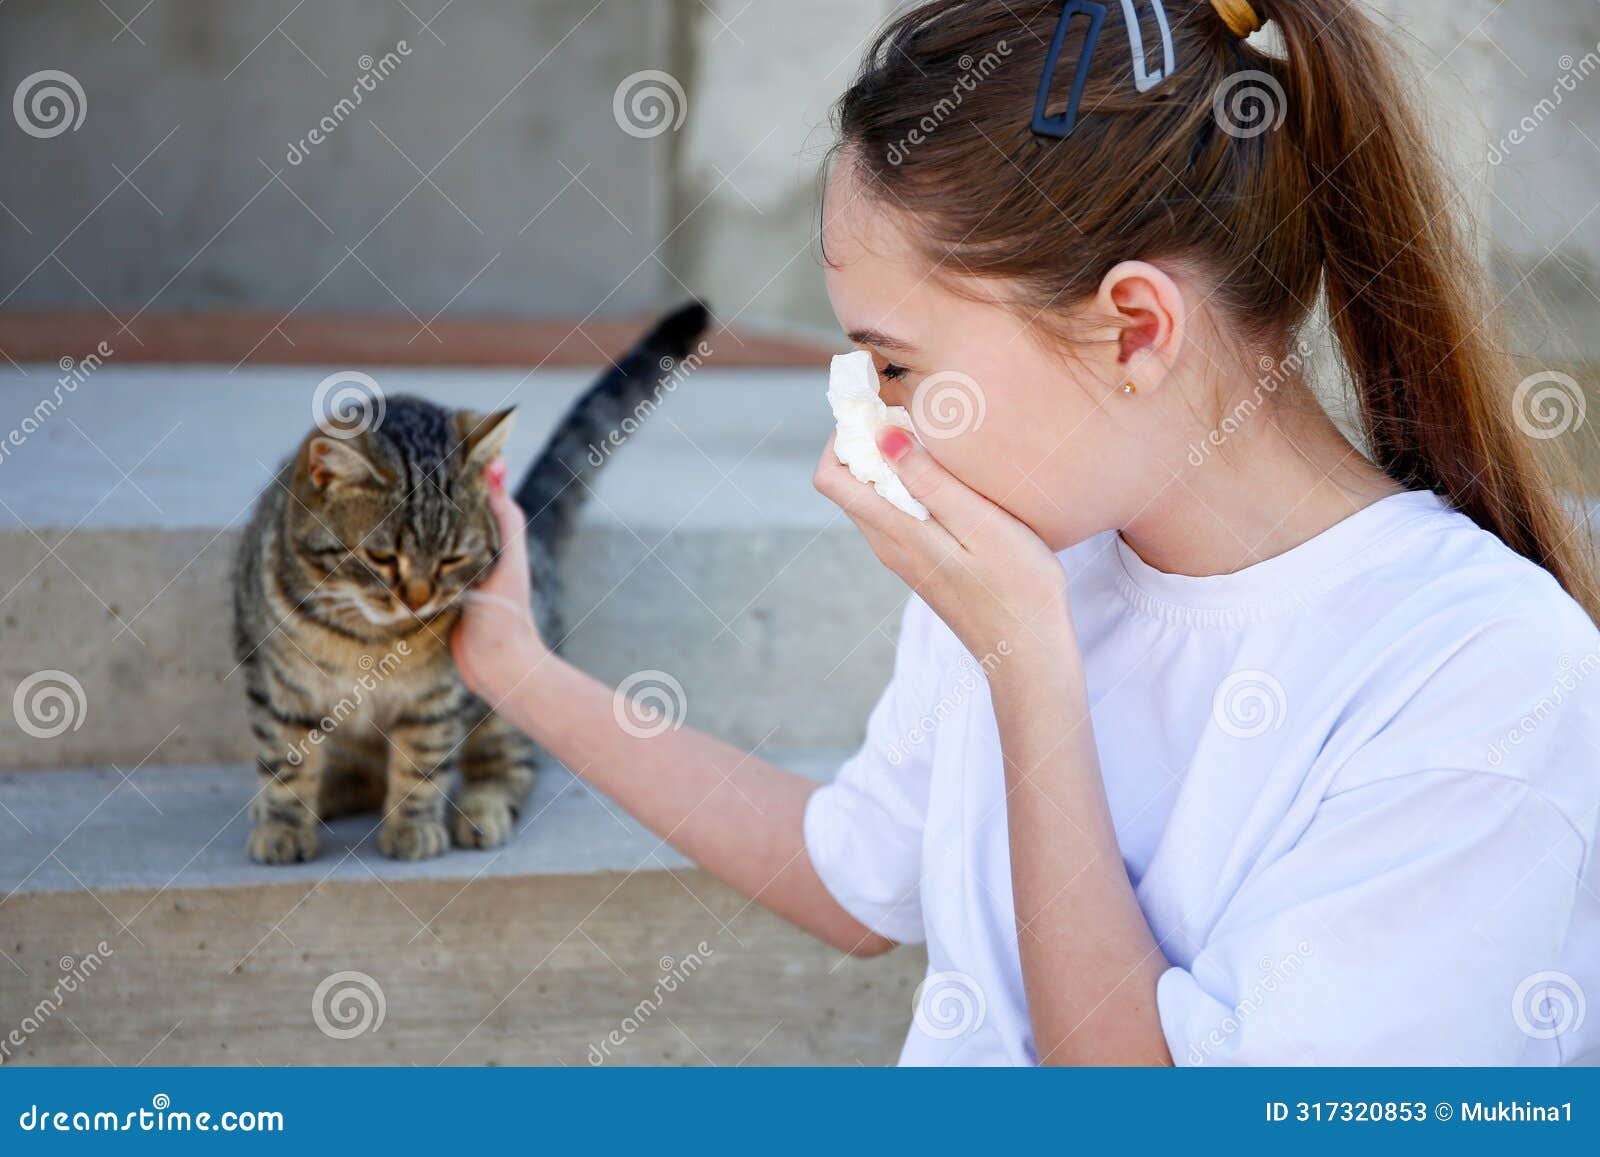 the teenager is allergic to a cat